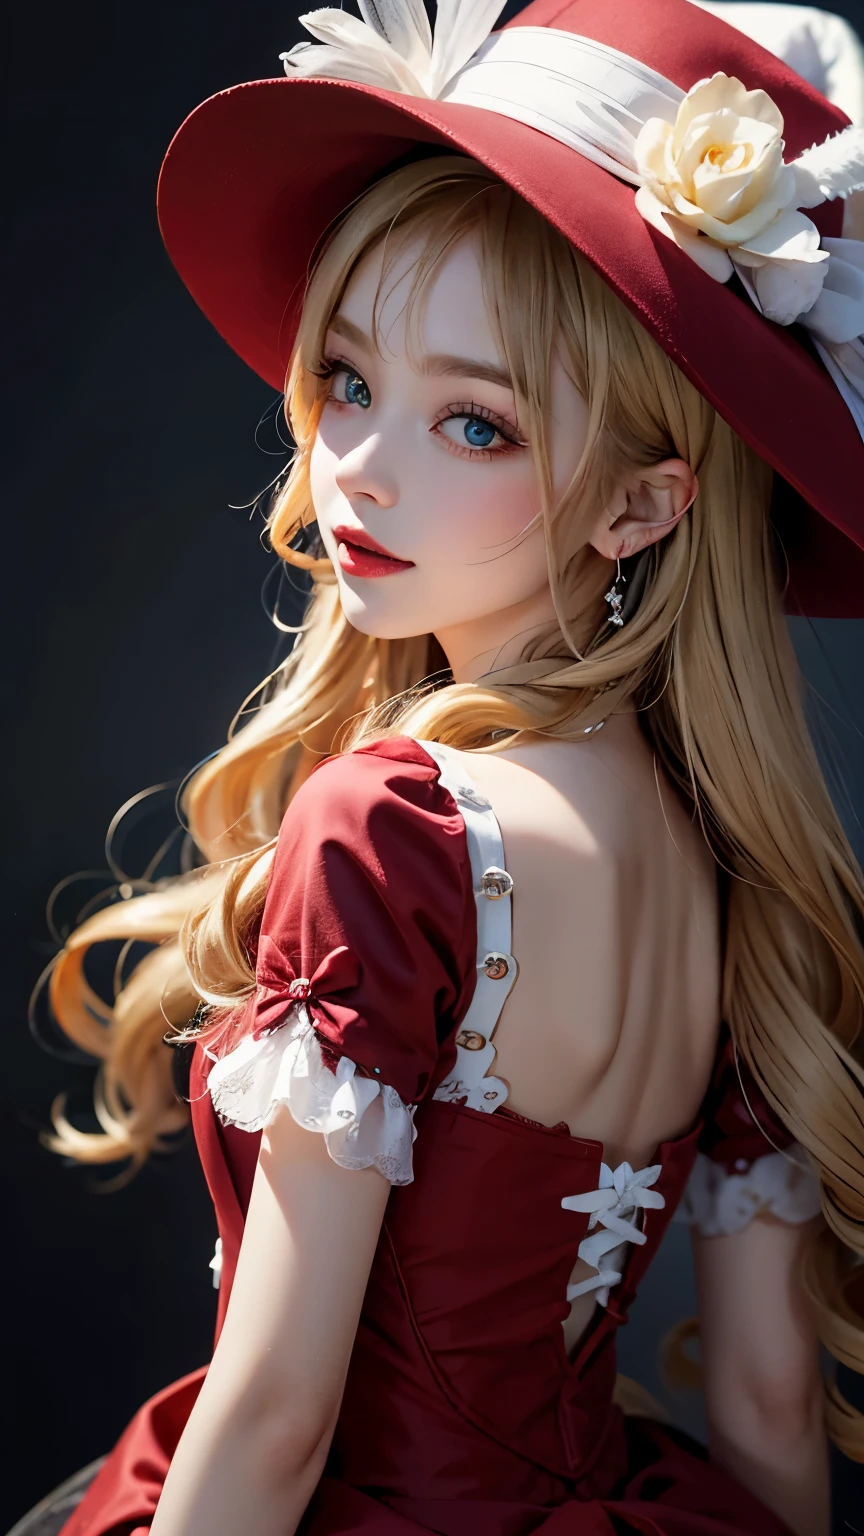 rose girl, Smile brightly，Crimson, toy doll, Transparent white skin, shiny blonde curls, High image quality, HD, transparency, Clear, Upper body, Gothic dress in red velvet fabric, Cobalt blue eyes，Nice hat